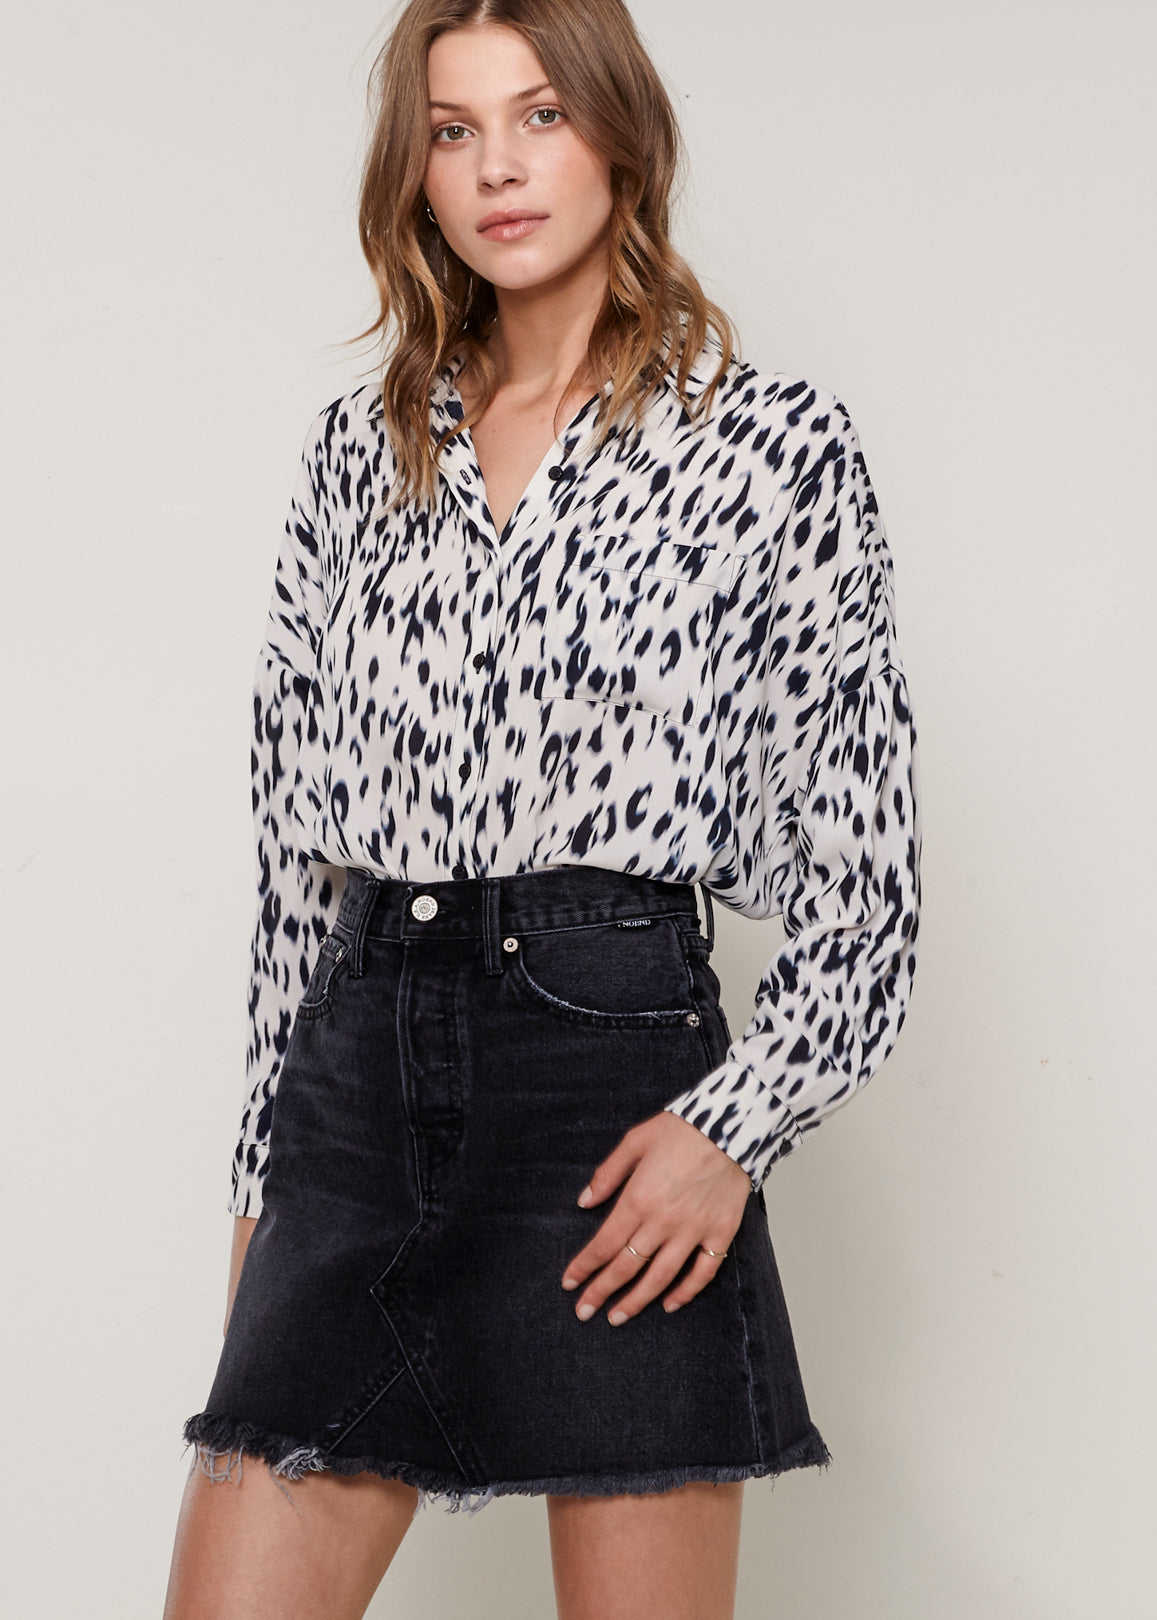 Explore our collection of chic printed blouses. Elevate your look with these versatile and stylish tops. Shop now and embrace fashionable comfort!